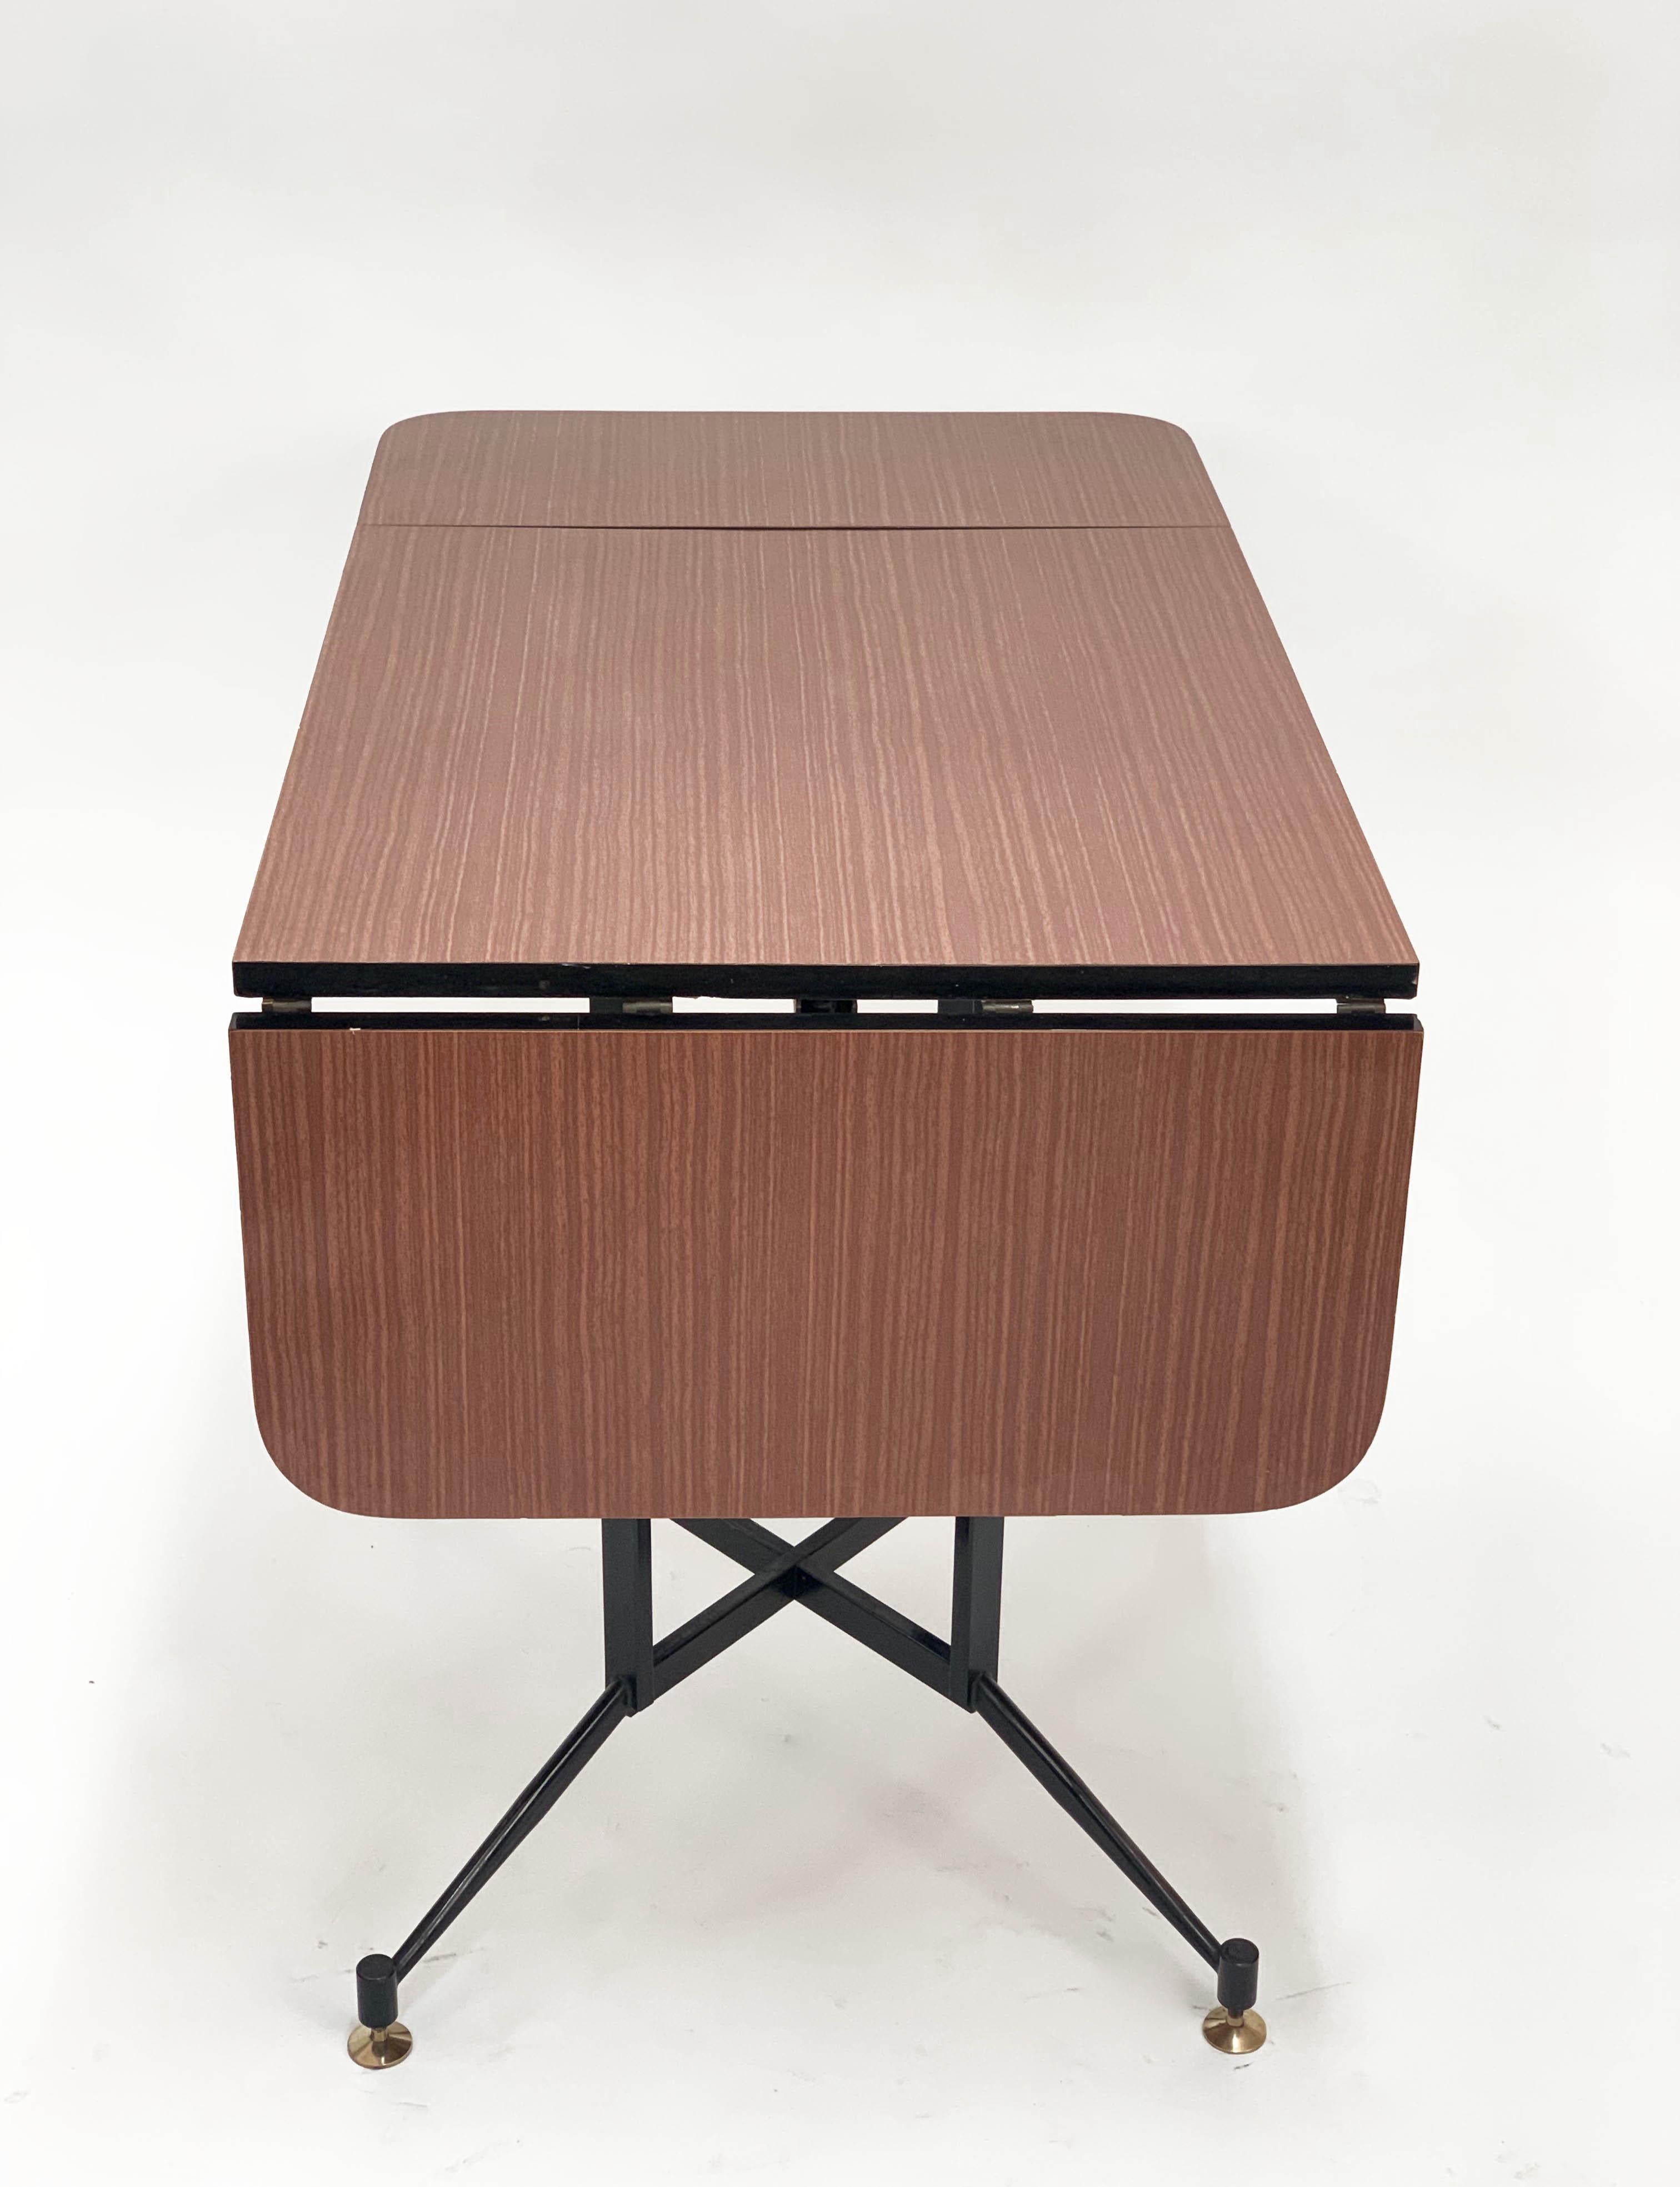 Lacquered Gardella Midcentury Formica Steel and Brass Table, Laminati Plastici Italy 1950s For Sale